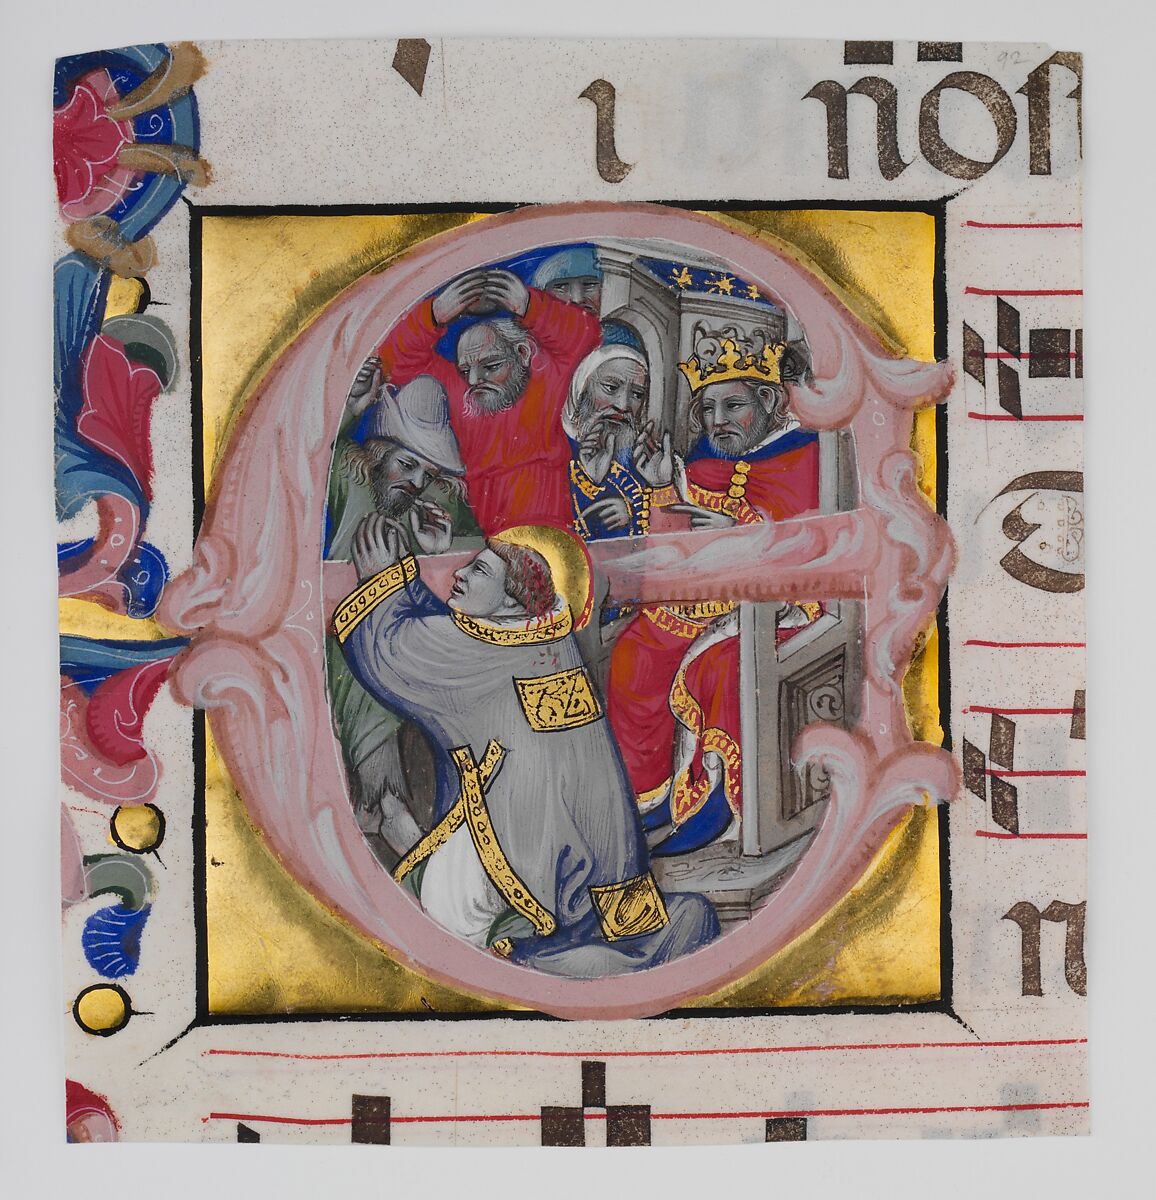 Manuscript Illumination with the Martyrdom of Saint Stephen in an Initial E, from a Gradual